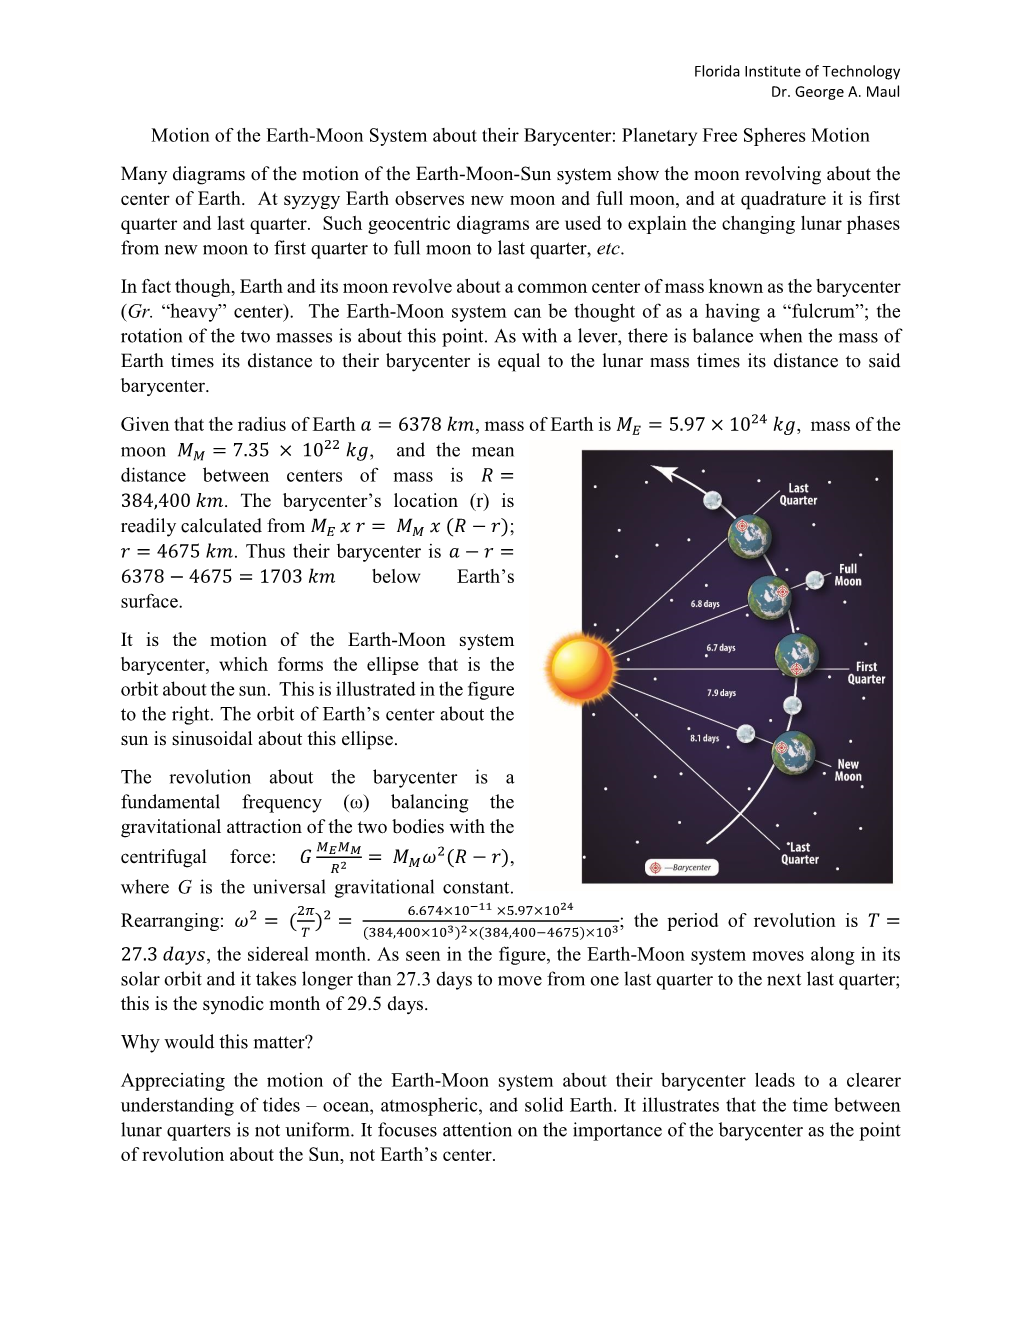 Motion of the Earth-Moon System About Their Barycenter: Planetary